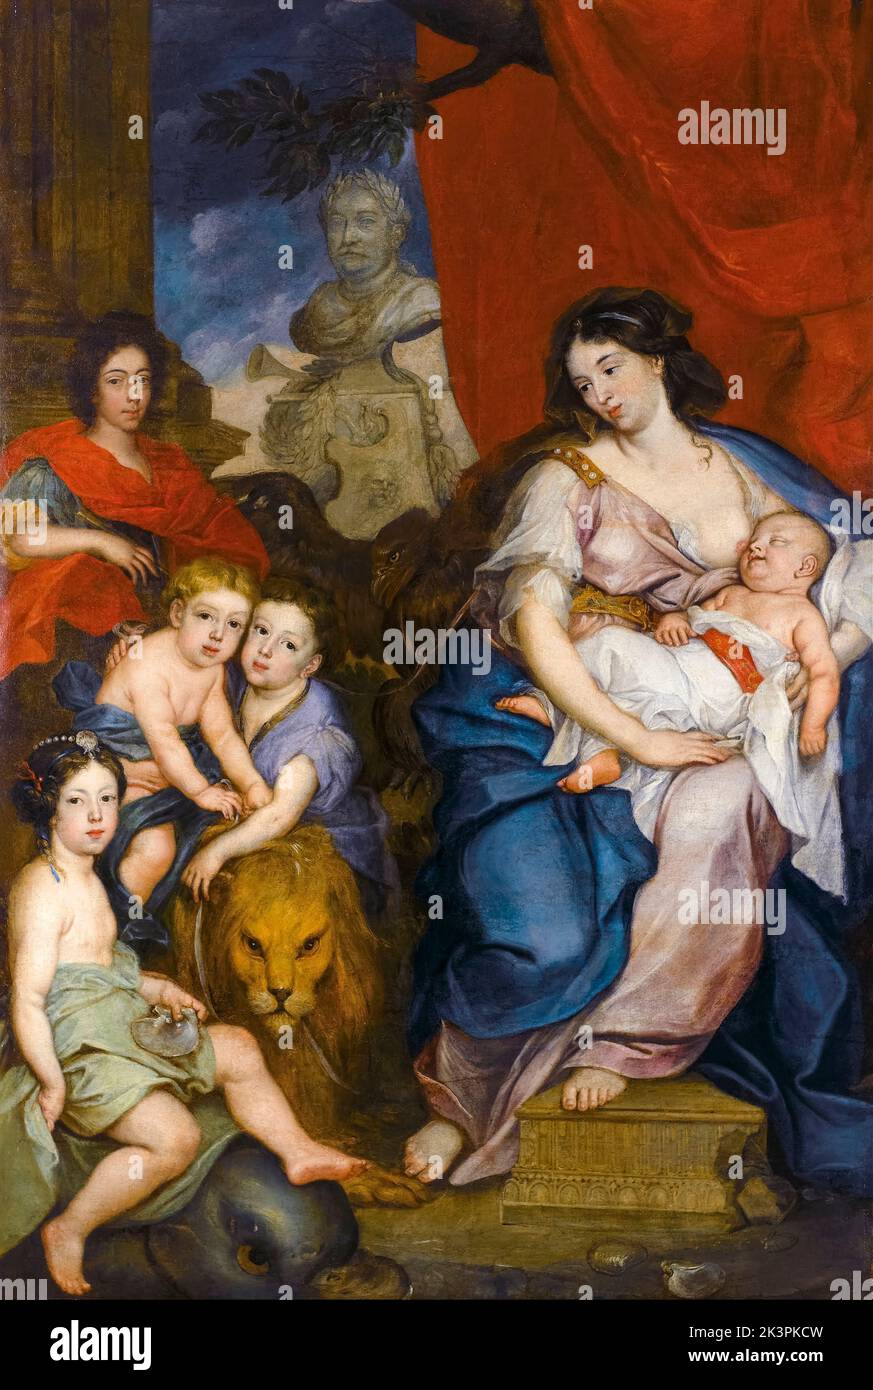 Marie Casimire (1641-1716), Queen Consort of Poland and Grand Duchess Consort Of Lithuania (1674-1696) with children, portrait painting in oil on canvas by Jerzy Eleuter Szymonowicz Siemiginowski, 1684 Stock Photo